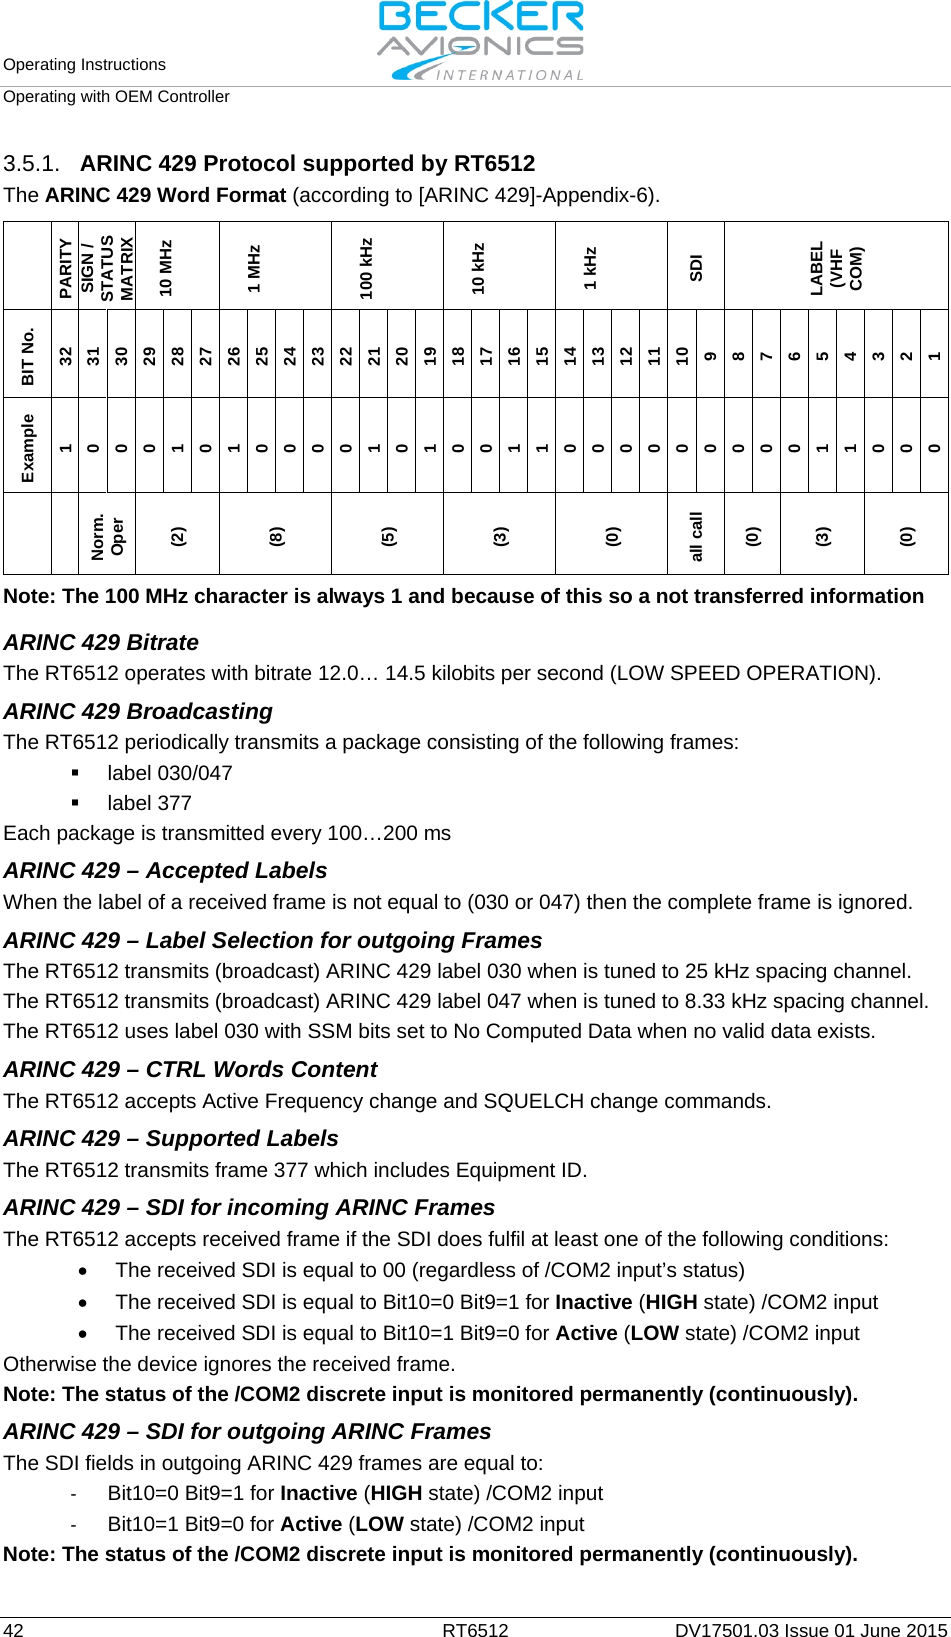 Operating Instructions   Operating with OEM Controller  42 RT6512 DV17501.03 Issue 01 June 2015 3.5.1. ARINC 429 Protocol supported by RT6512 The ARINC 429 Word Format (according to [ARINC 429]-Appendix-6).   PARITY SIGN / STATUS MATRIX 10 MHz  1 MHz   100 kHz   10 kHz   1 kHz   SDI LABEL (VHF COM) BIT No. 32 31 30 29 28 27 26 25 24 23 22 21 20 19 18 17 16 15 14 13 12 11 10 9 8 7 6 5 4 3 2 1 Example 1 0 0 0 1 0 1 0 0 0 0 1 0 1 0 0 1 1 0 0 0 0 0 0 0 0 0 1 1 0 0 0   Norm. Oper (2) (8) (5) (3) (0) all call (0) (3) (0)  Note: The 100 MHz character is always 1 and because of this so a not transferred information  ARINC 429 Bitrate The RT6512 operates with bitrate 12.0… 14.5 kilobits per second (LOW SPEED OPERATION). ARINC 429 Broadcasting  The RT6512 periodically transmits a package consisting of the following frames:  label 030/047  label 377 Each package is transmitted every 100…200 ms ARINC 429 – Accepted Labels  When the label of a received frame is not equal to (030 or 047) then the complete frame is ignored. ARINC 429 – Label Selection for outgoing Frames The RT6512 transmits (broadcast) ARINC 429 label 030 when is tuned to 25 kHz spacing channel. The RT6512 transmits (broadcast) ARINC 429 label 047 when is tuned to 8.33 kHz spacing channel. The RT6512 uses label 030 with SSM bits set to No Computed Data when no valid data exists.  ARINC 429 – CTRL Words Content  The RT6512 accepts Active Frequency change and SQUELCH change commands. ARINC 429 – Supported Labels  The RT6512 transmits frame 377 which includes Equipment ID. ARINC 429 – SDI for incoming ARINC Frames  The RT6512 accepts received frame if the SDI does fulfil at least one of the following conditions: • The received SDI is equal to 00 (regardless of /COM2 input’s status) • The received SDI is equal to Bit10=0 Bit9=1 for Inactive (HIGH state) /COM2 input  • The received SDI is equal to Bit10=1 Bit9=0 for Active (LOW state) /COM2 input Otherwise the device ignores the received frame. Note: The status of the /COM2 discrete input is monitored permanently (continuously). ARINC 429 – SDI for outgoing ARINC Frames The SDI fields in outgoing ARINC 429 frames are equal to: - Bit10=0 Bit9=1 for Inactive (HIGH state) /COM2 input - Bit10=1 Bit9=0 for Active (LOW state) /COM2 input  Note: The status of the /COM2 discrete input is monitored permanently (continuously). 